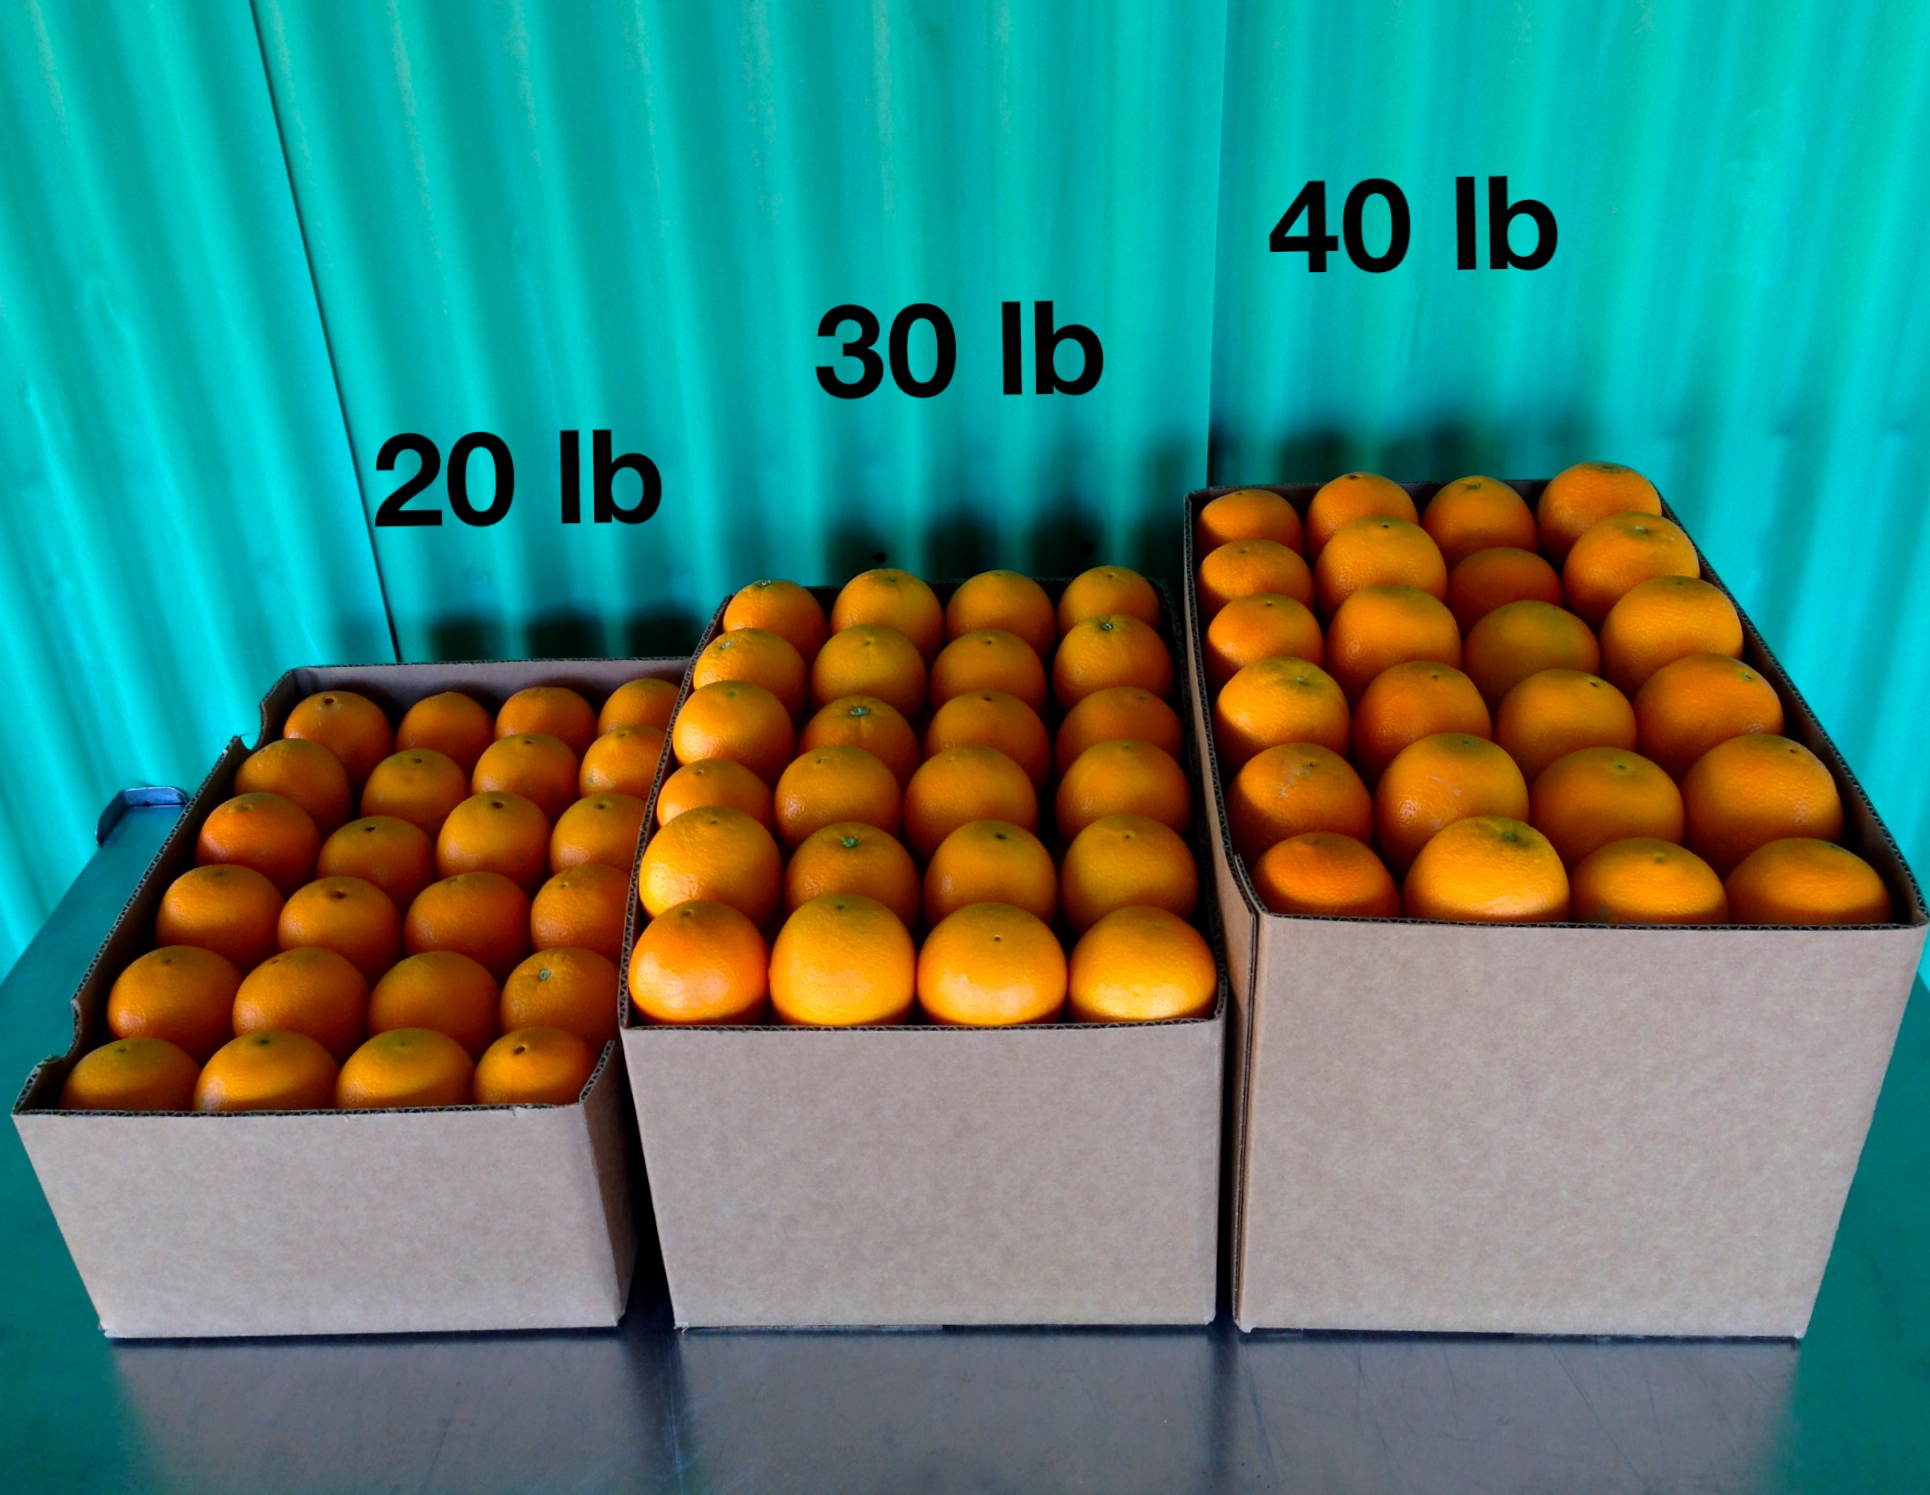 How Many Oranges in a Pound? 